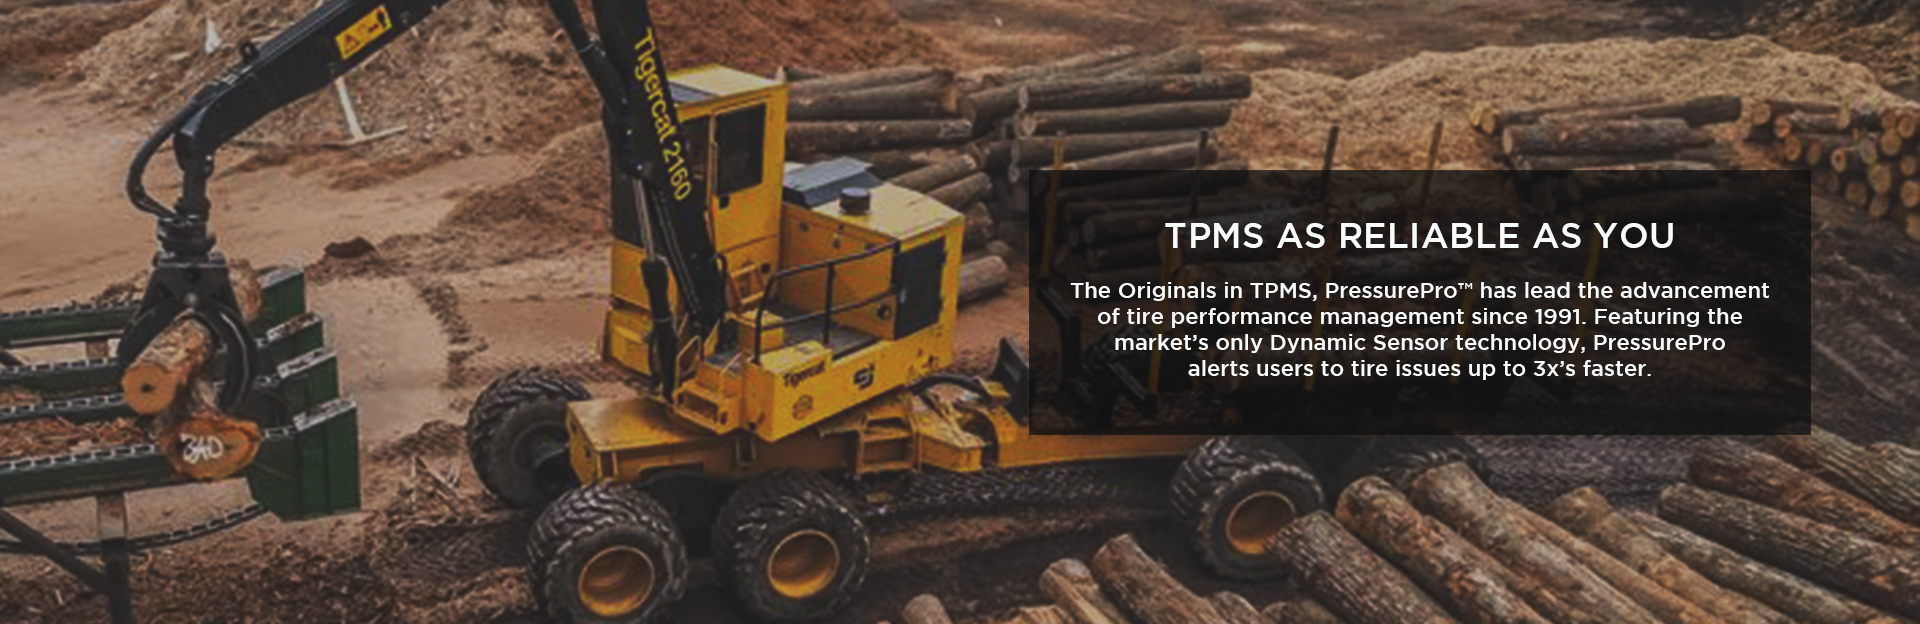 TPMS for forestry equipment